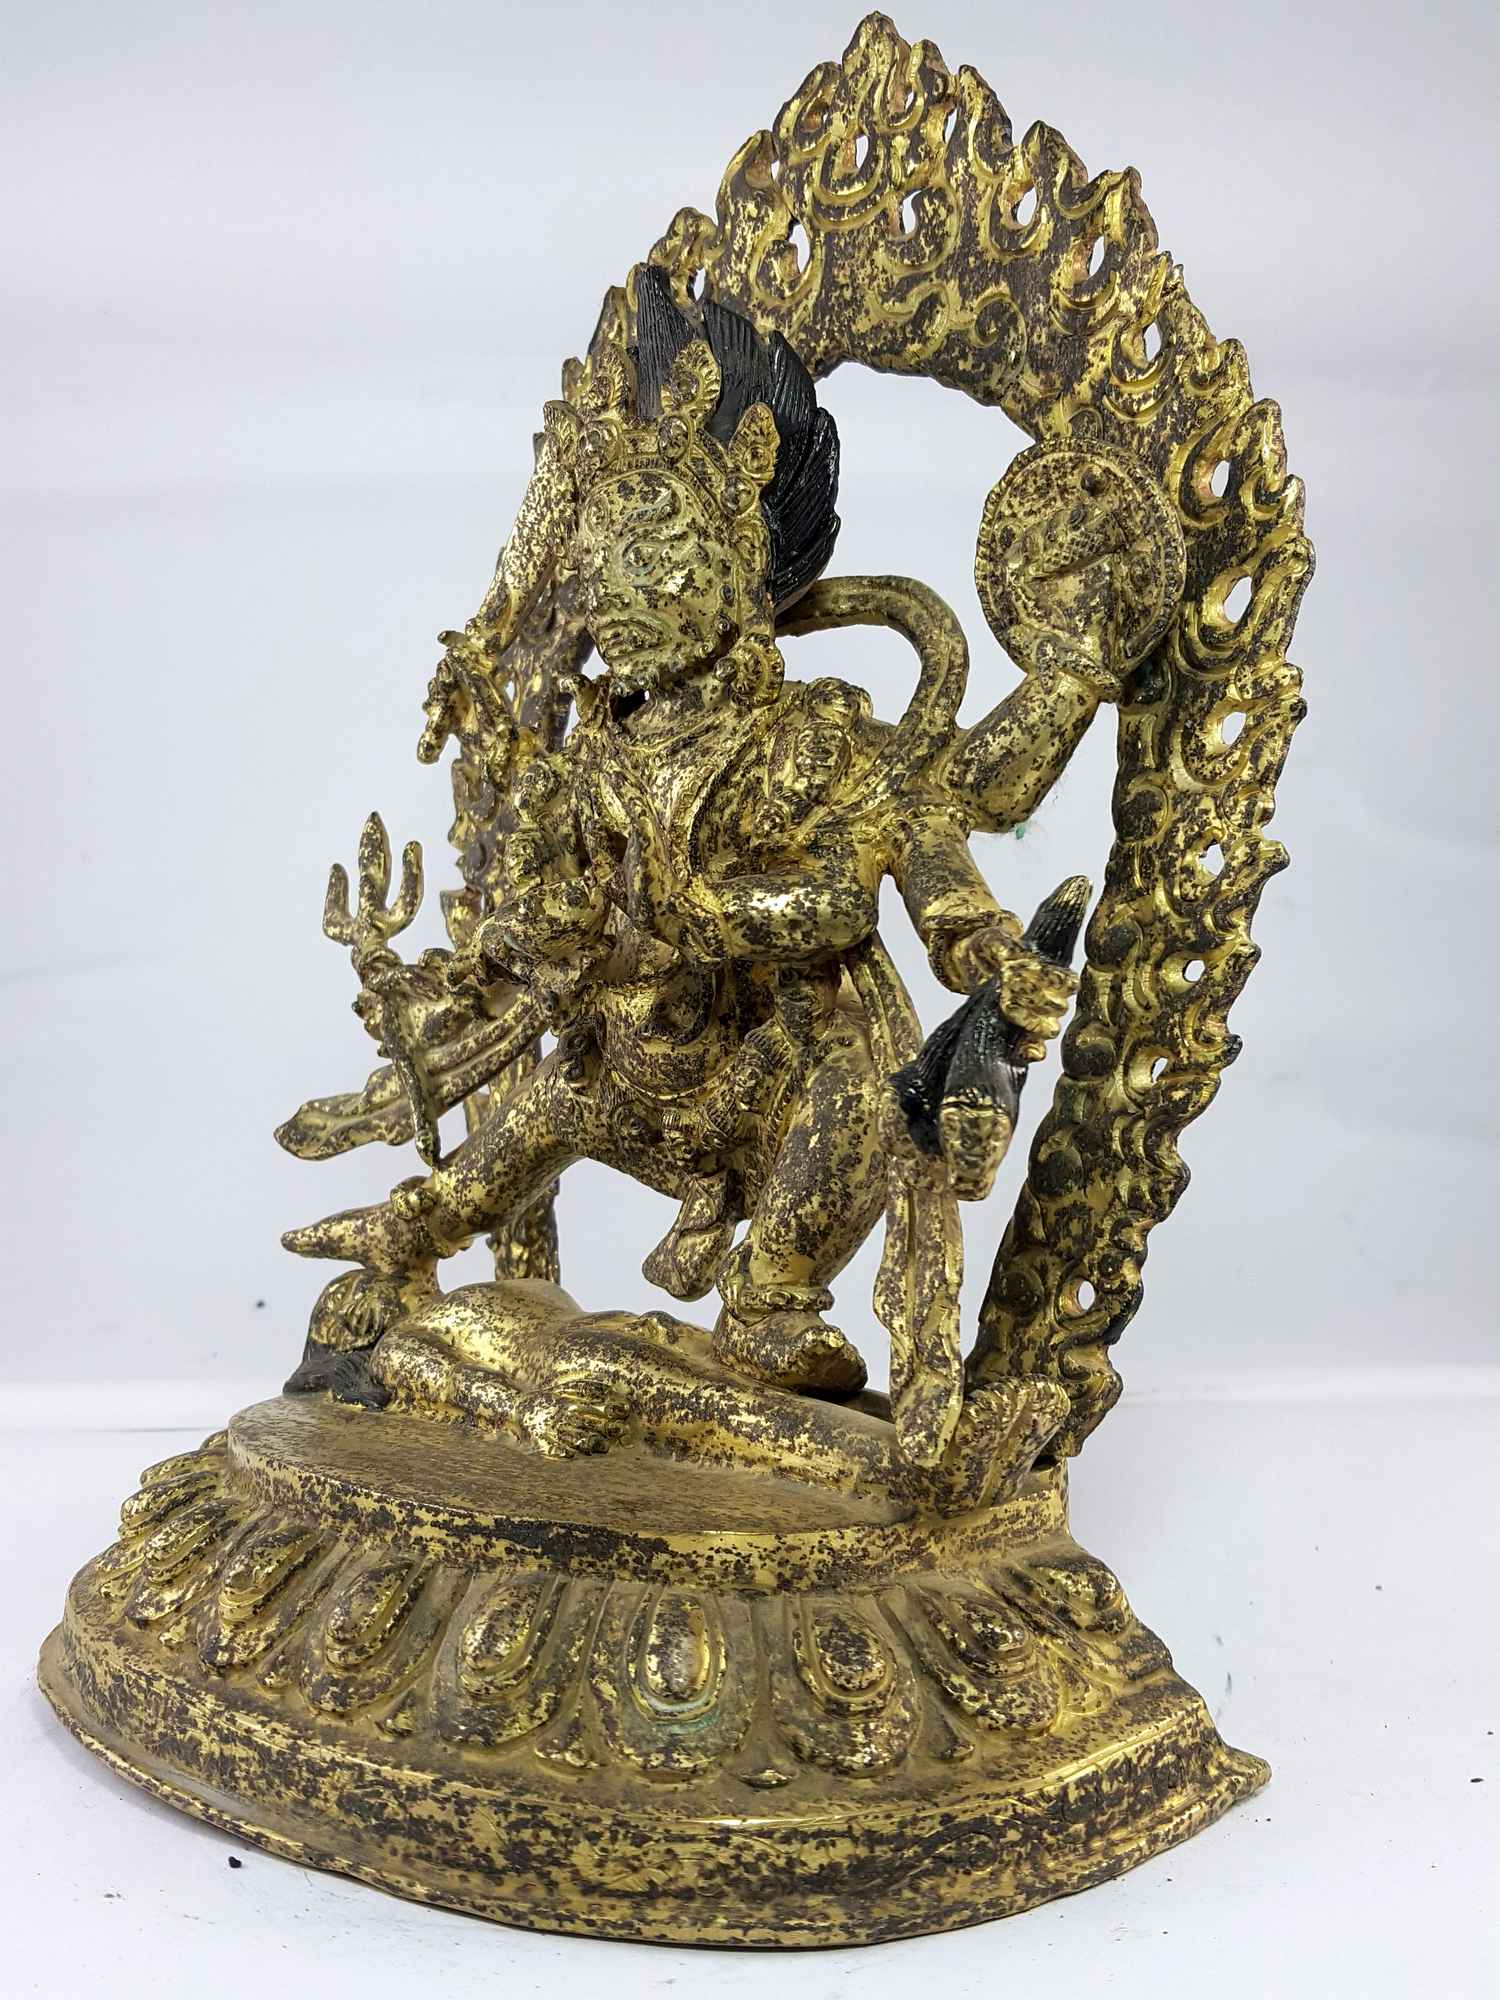 Kala Bhairab full Gold Plated, antique Finishing, rare Find